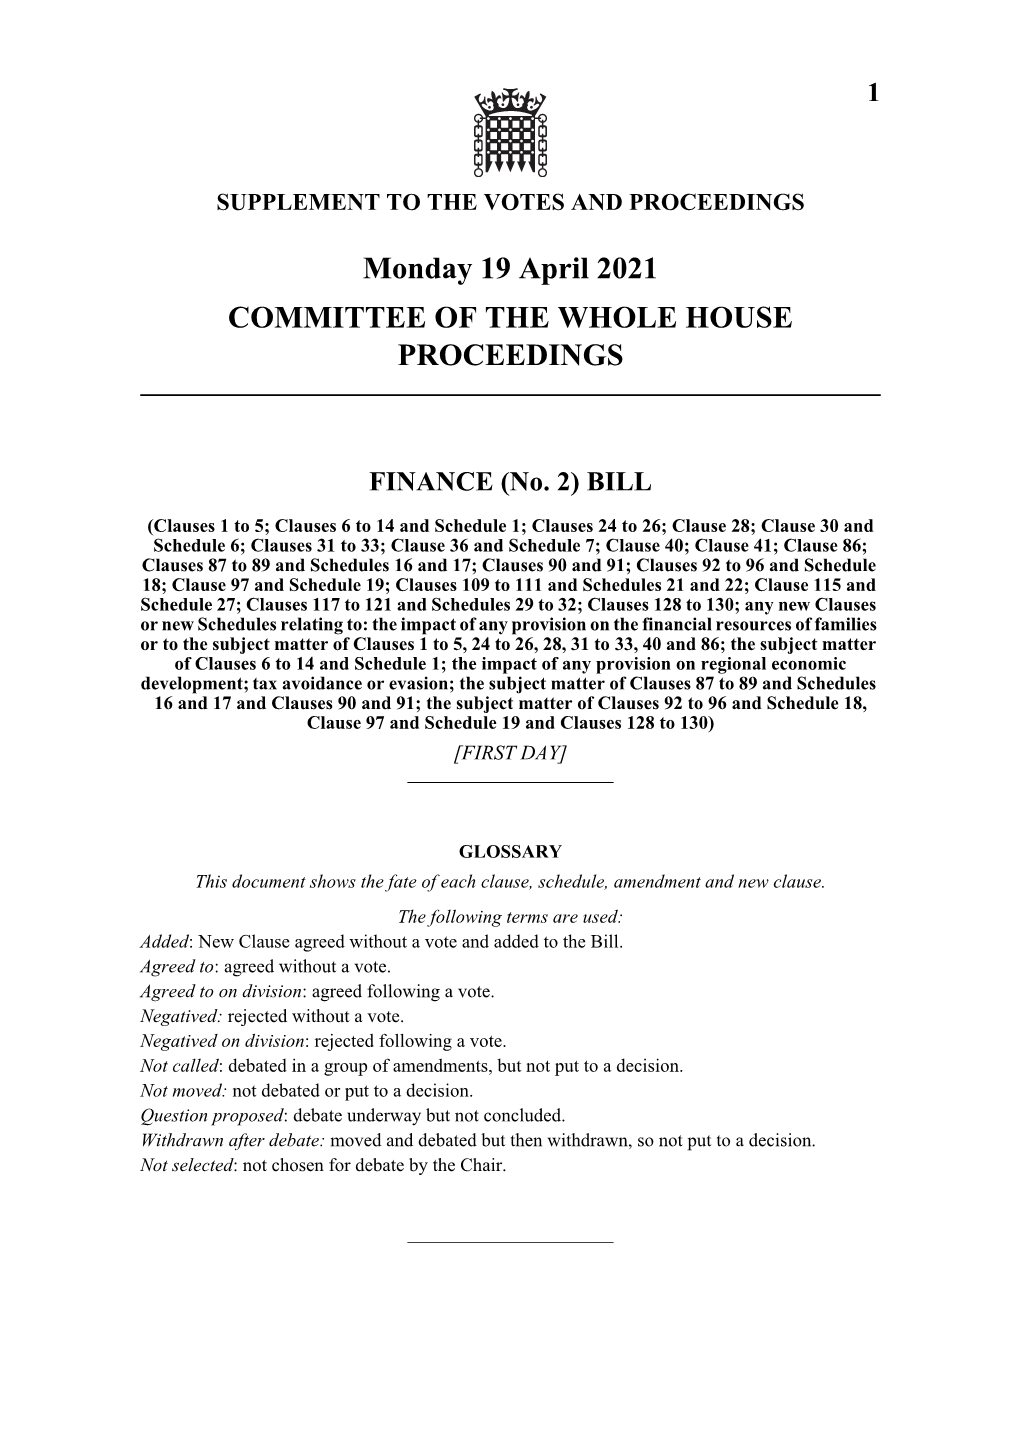 Monday 19 April 2021 COMMITTEE of the WHOLE HOUSE PROCEEDINGS